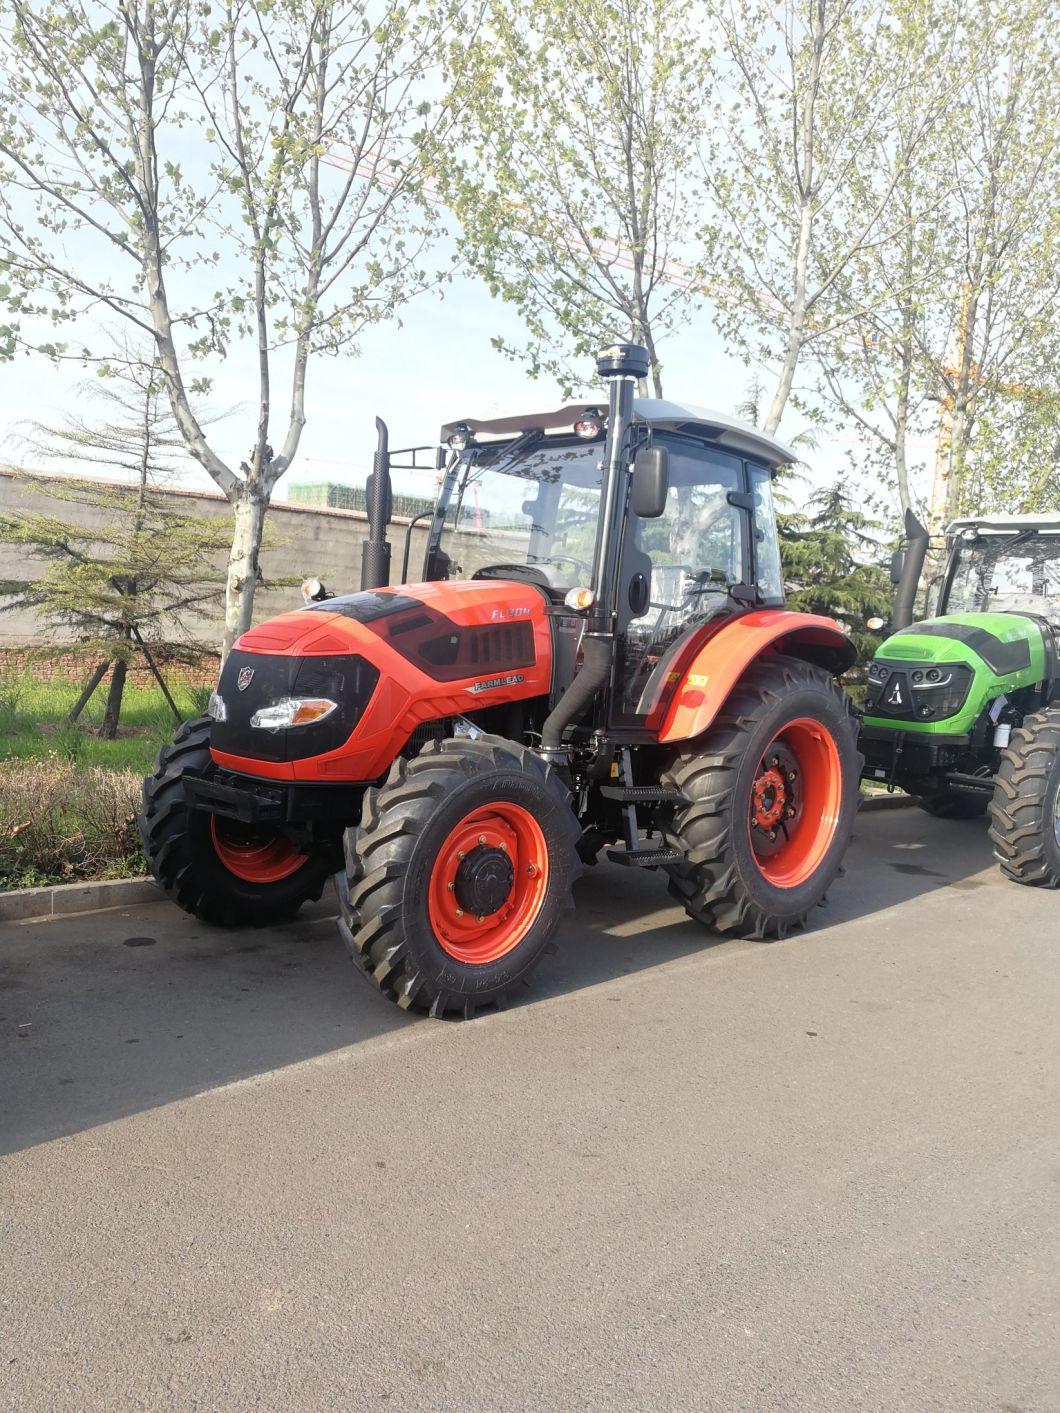 FL704 4 Cylinder Engine with Radial Tires, Paddy Tires for Ploughing and Front End Loaders